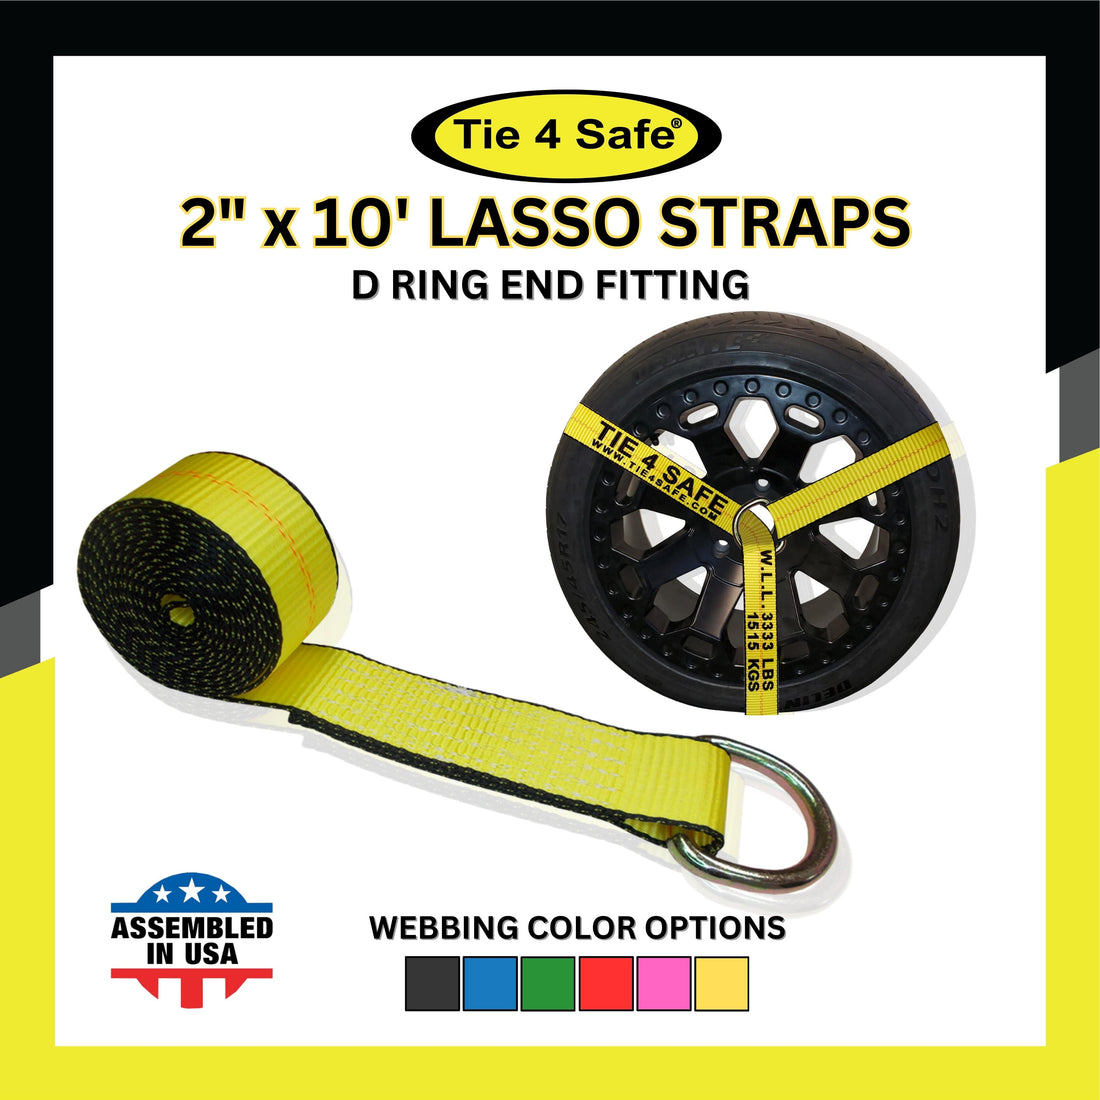 2" x 10' Lasso Strap With D-Ring